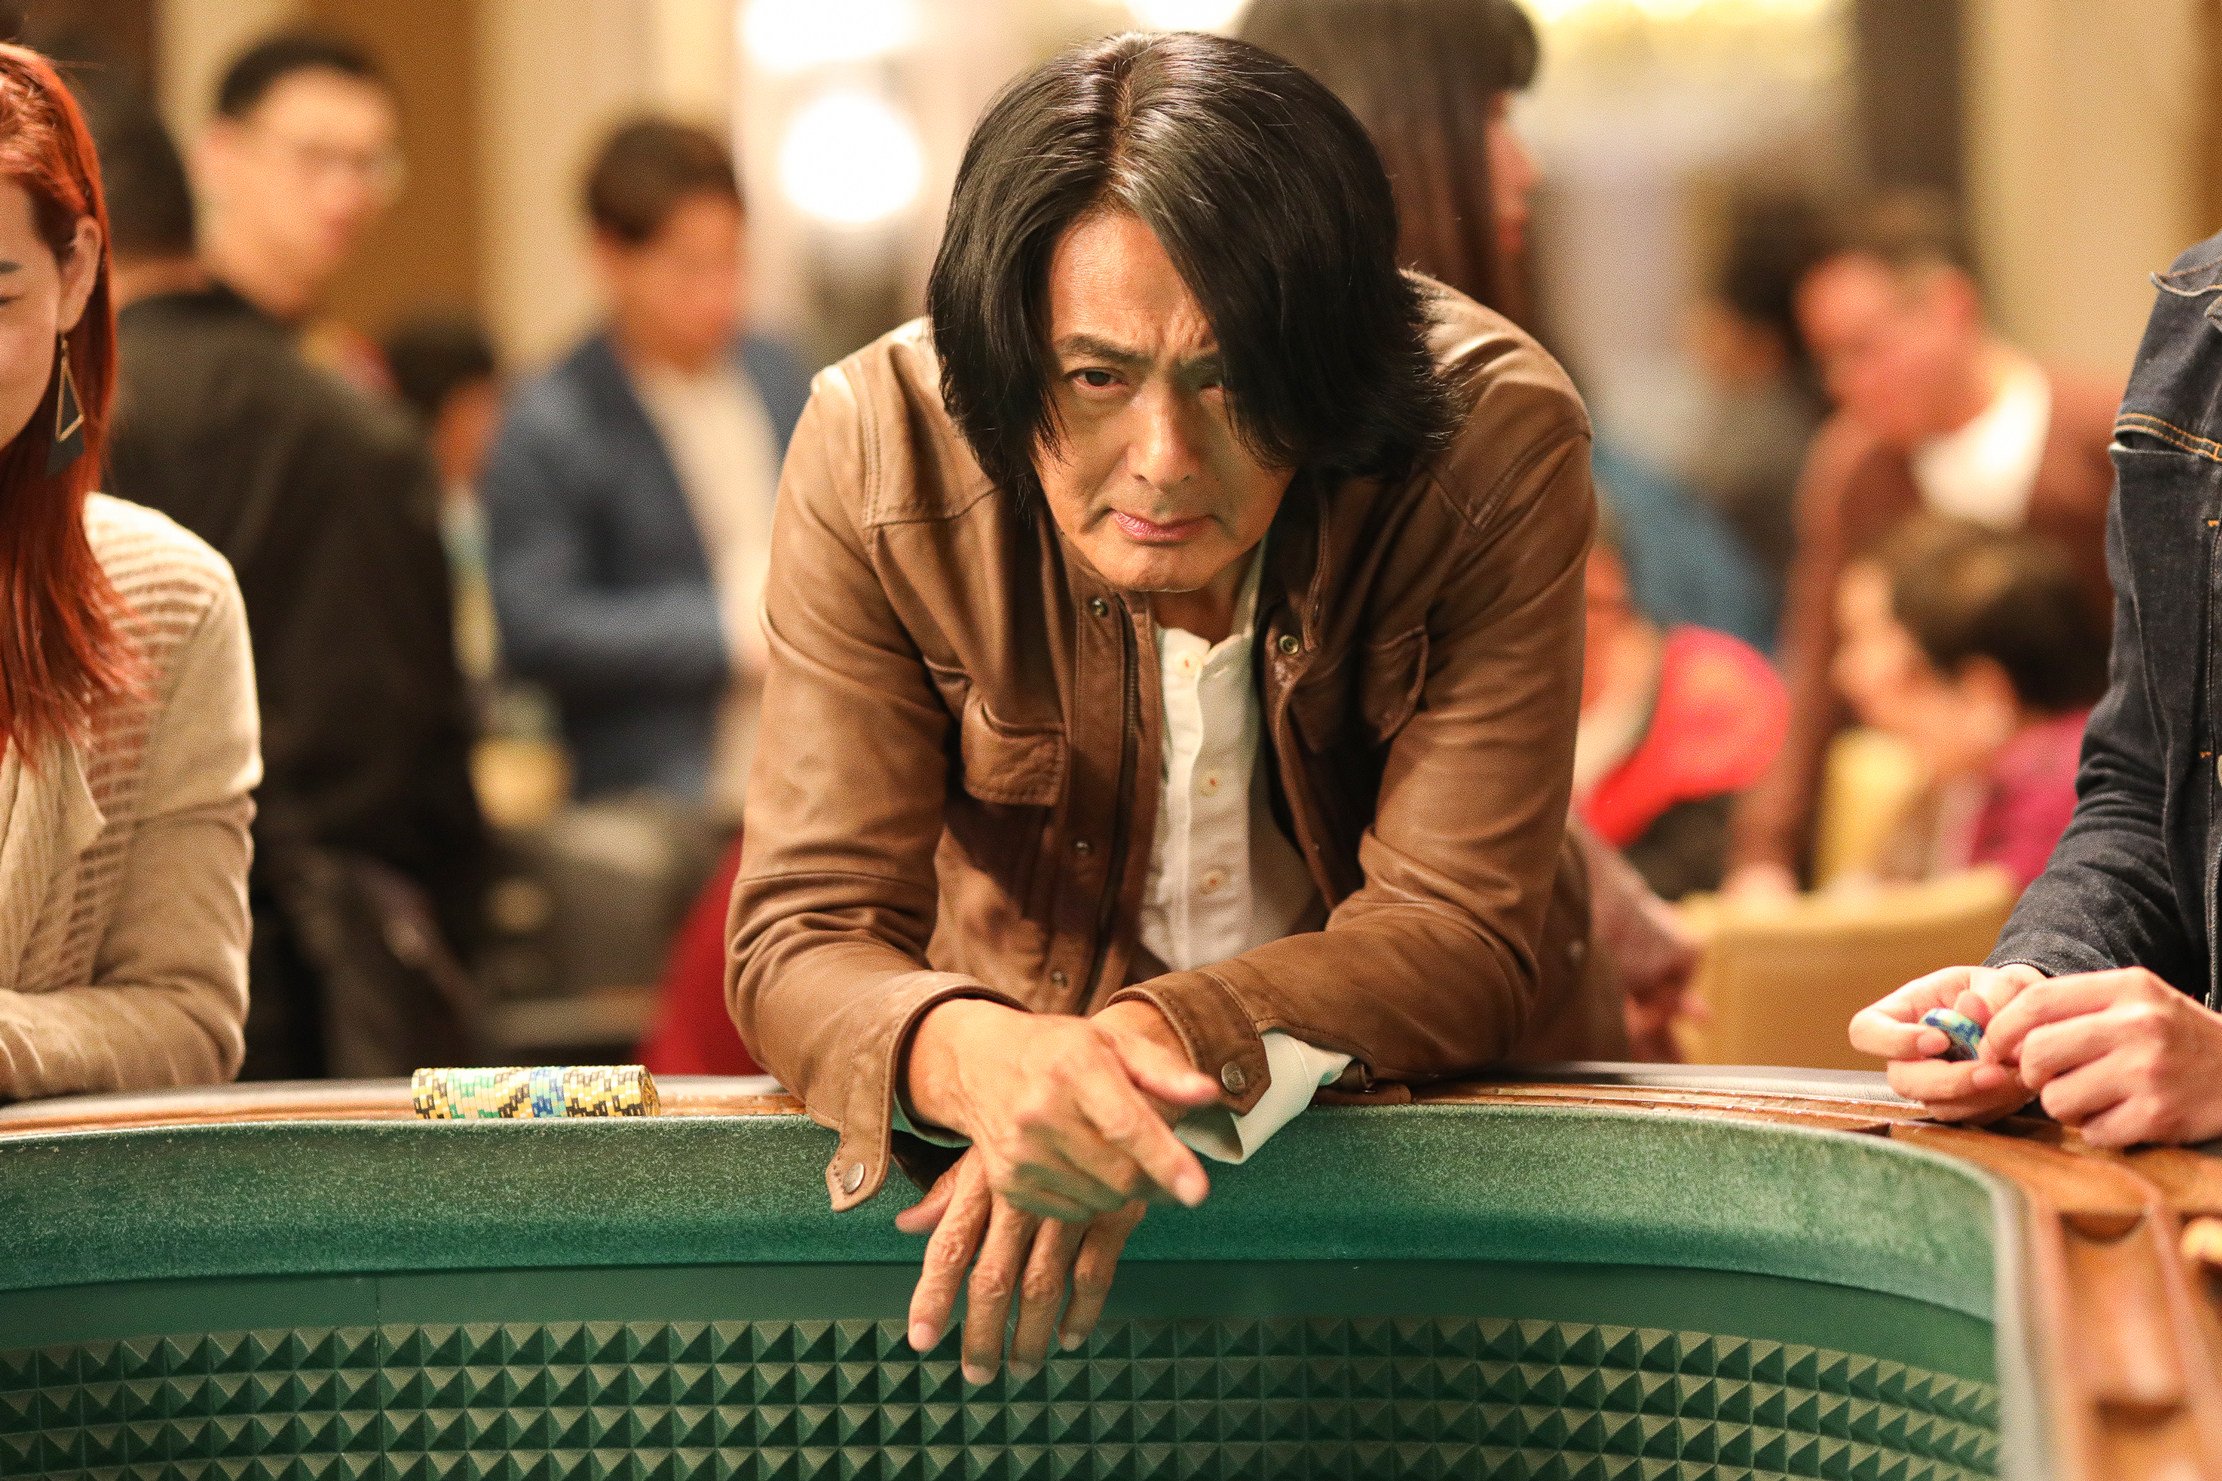 Chow Yun-fat in a still from “One More Chance”.